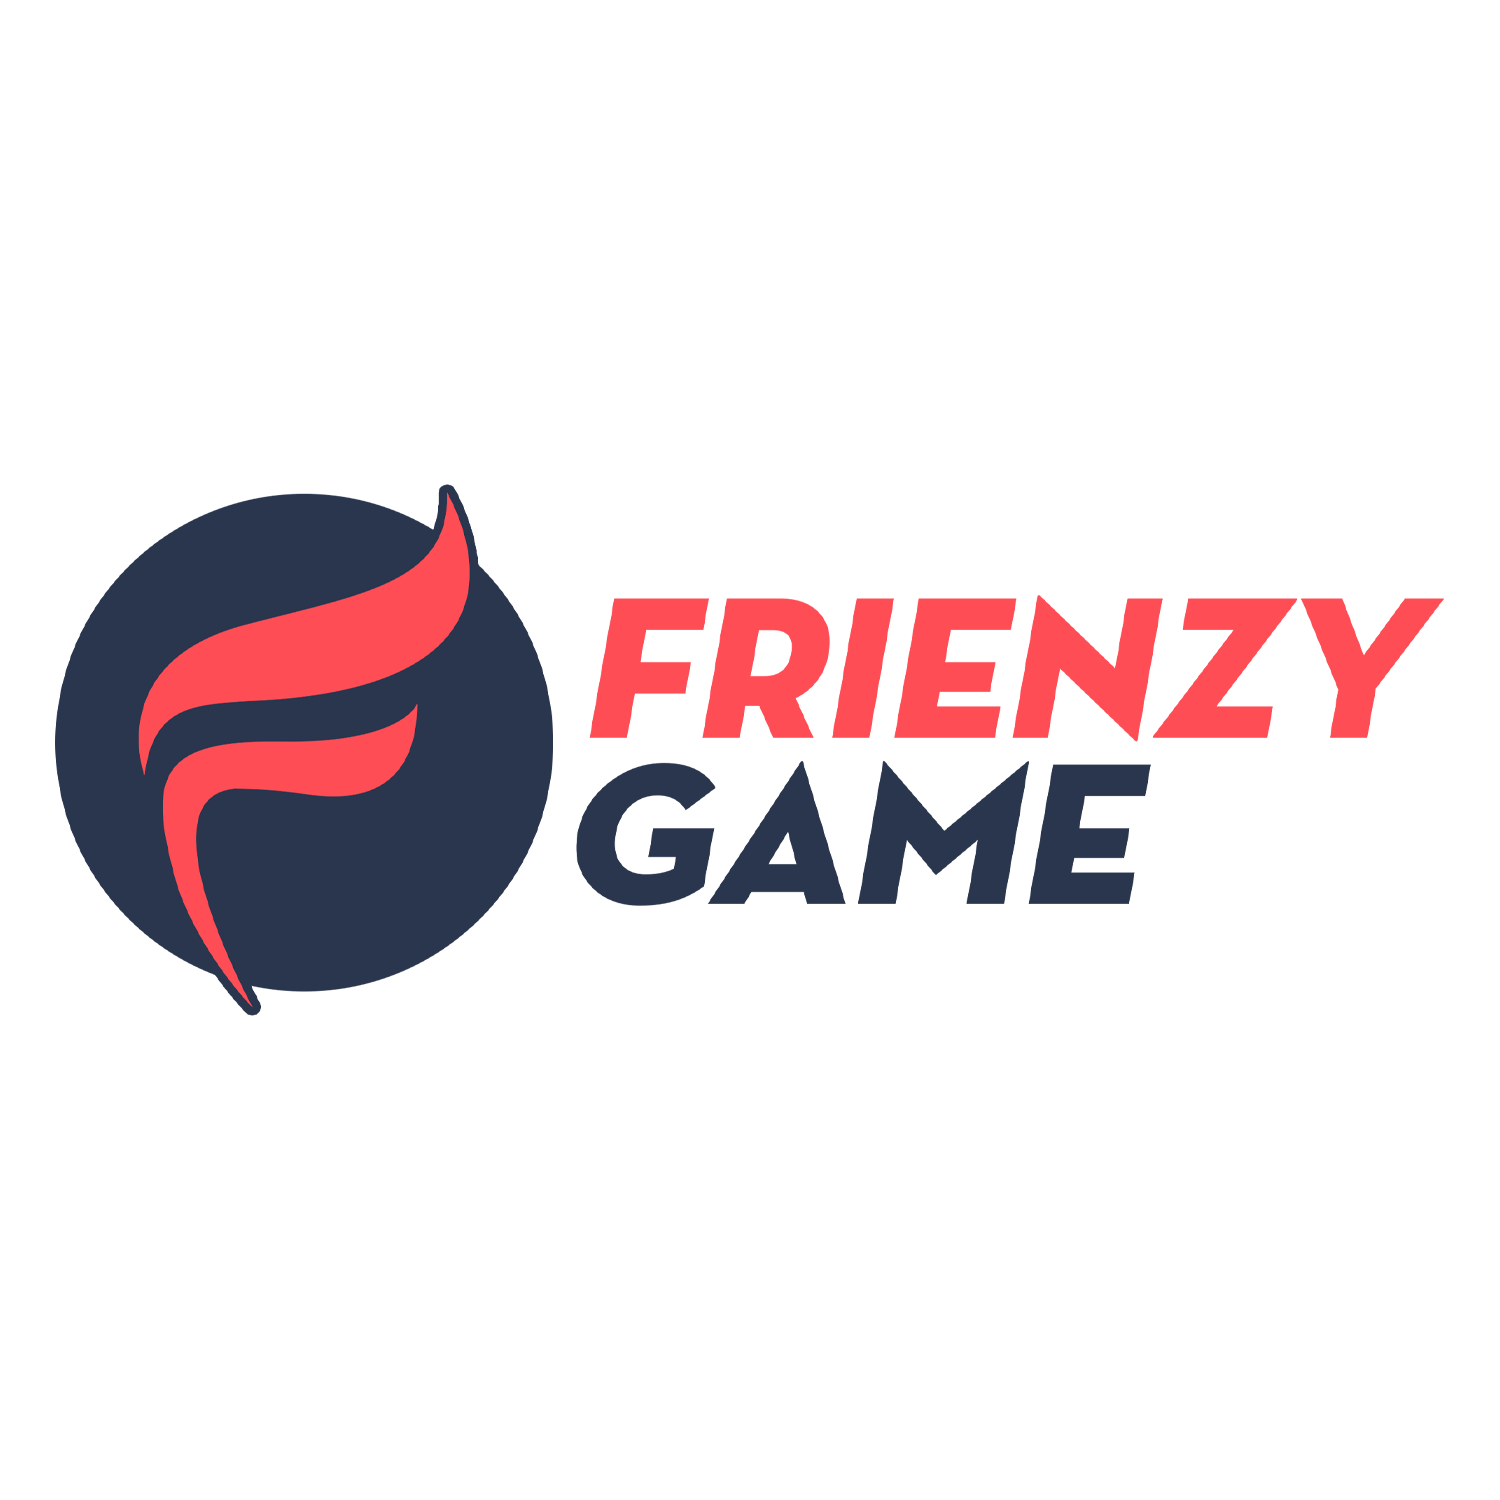 "FrienzyGame - The Best Place to Play Free Games O